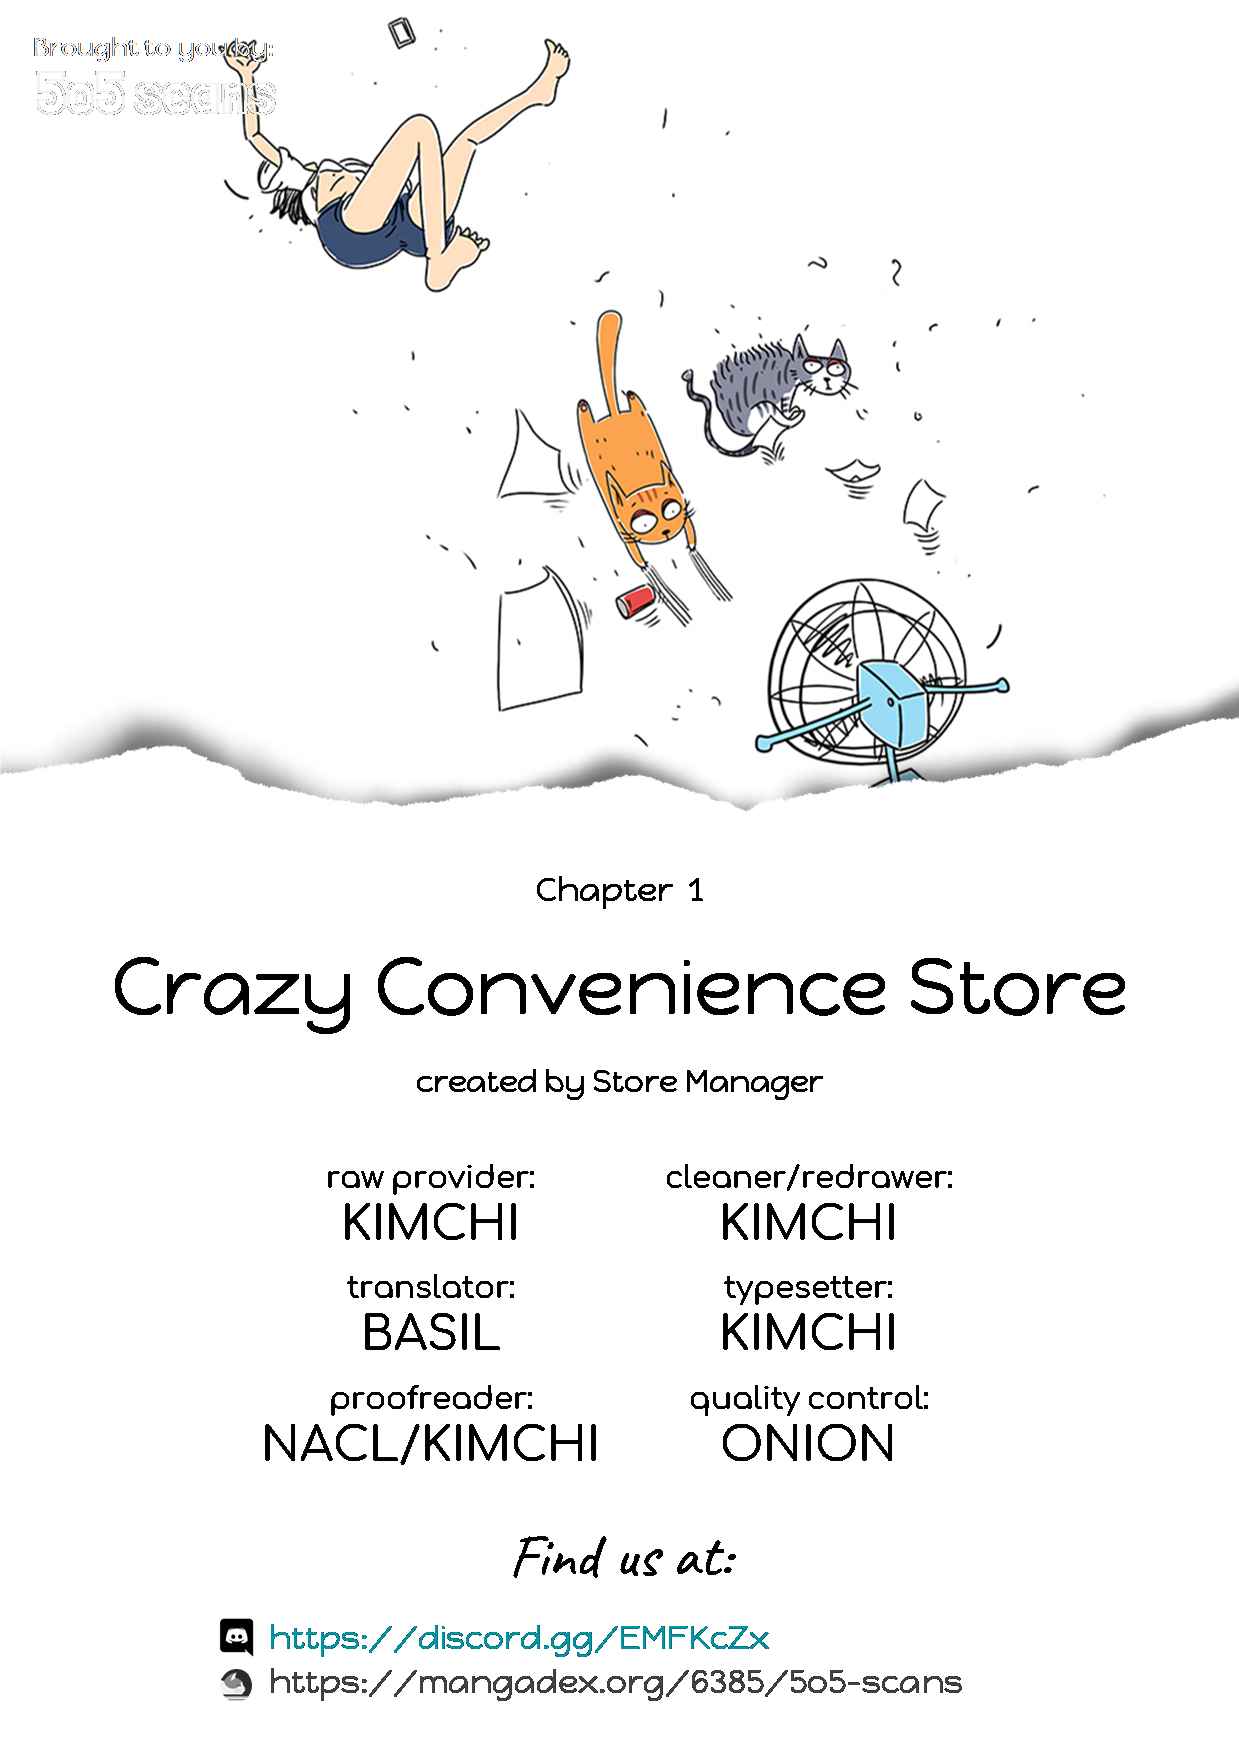 Crazy Convenience Store Ch. 1 Life wants to go through a series